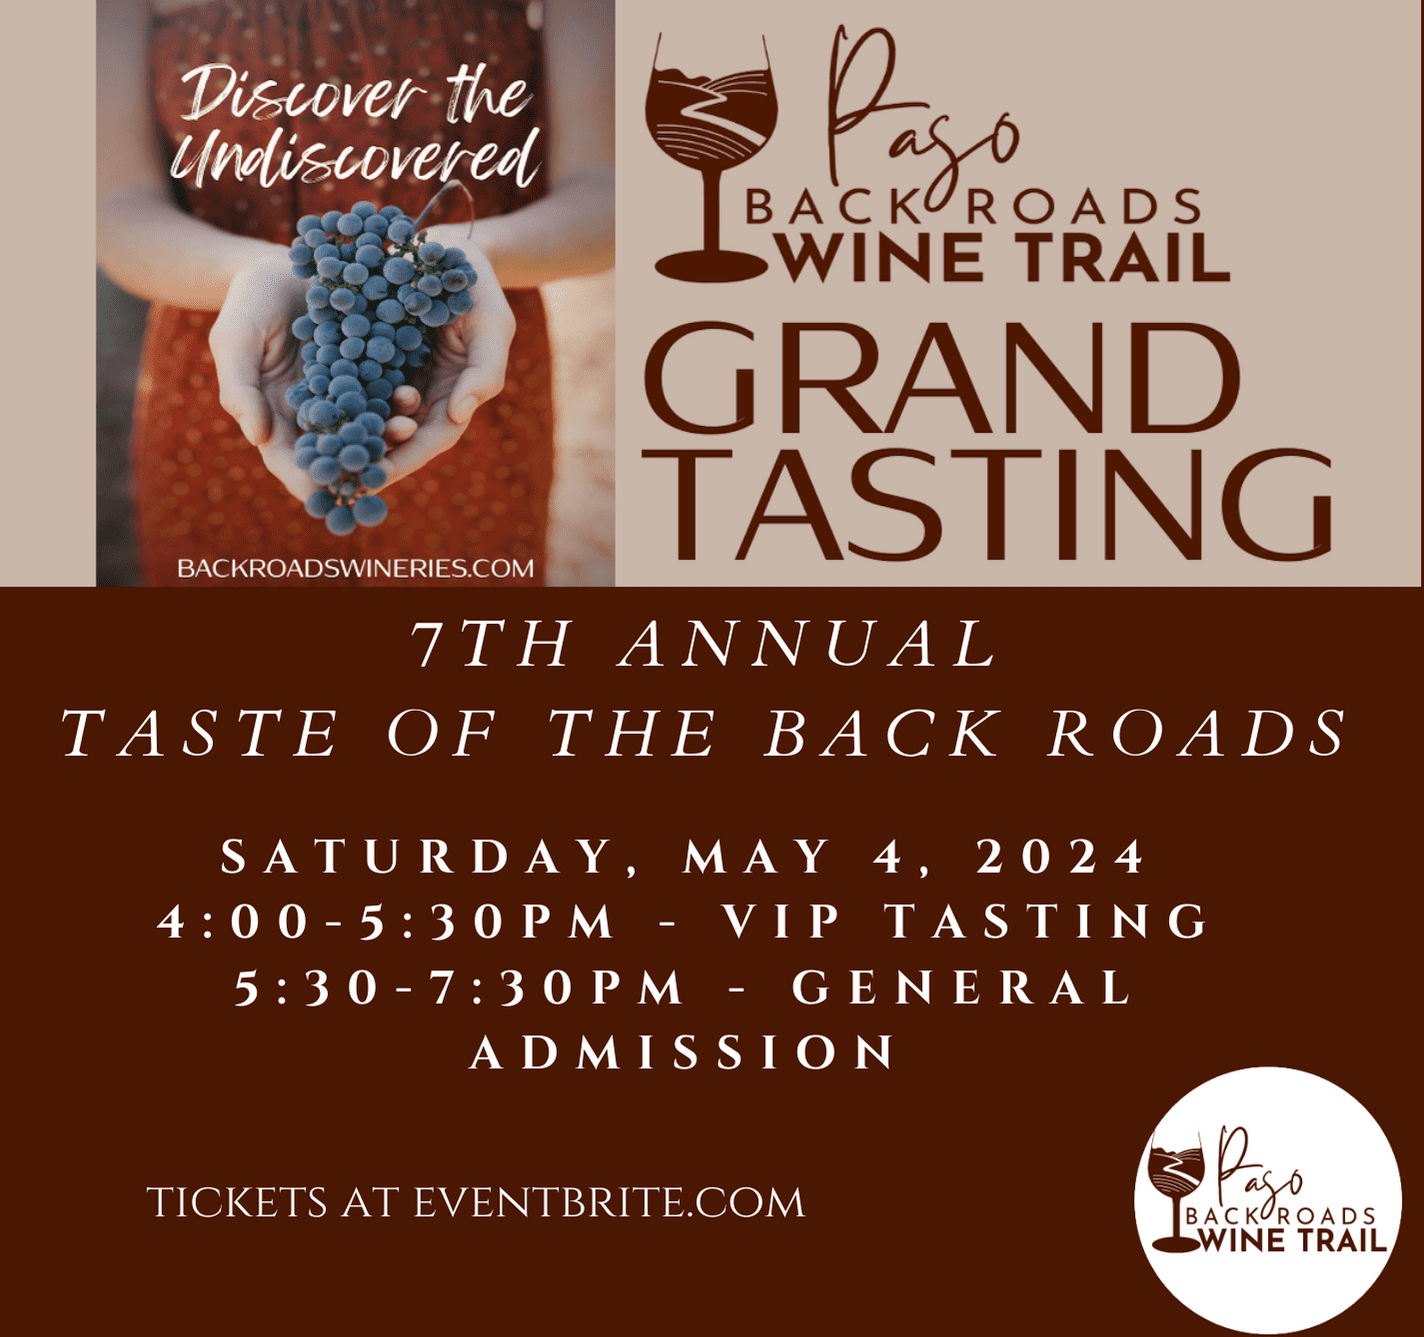 Vibrant event poster for the 7th Annual Taste of the Back Roads